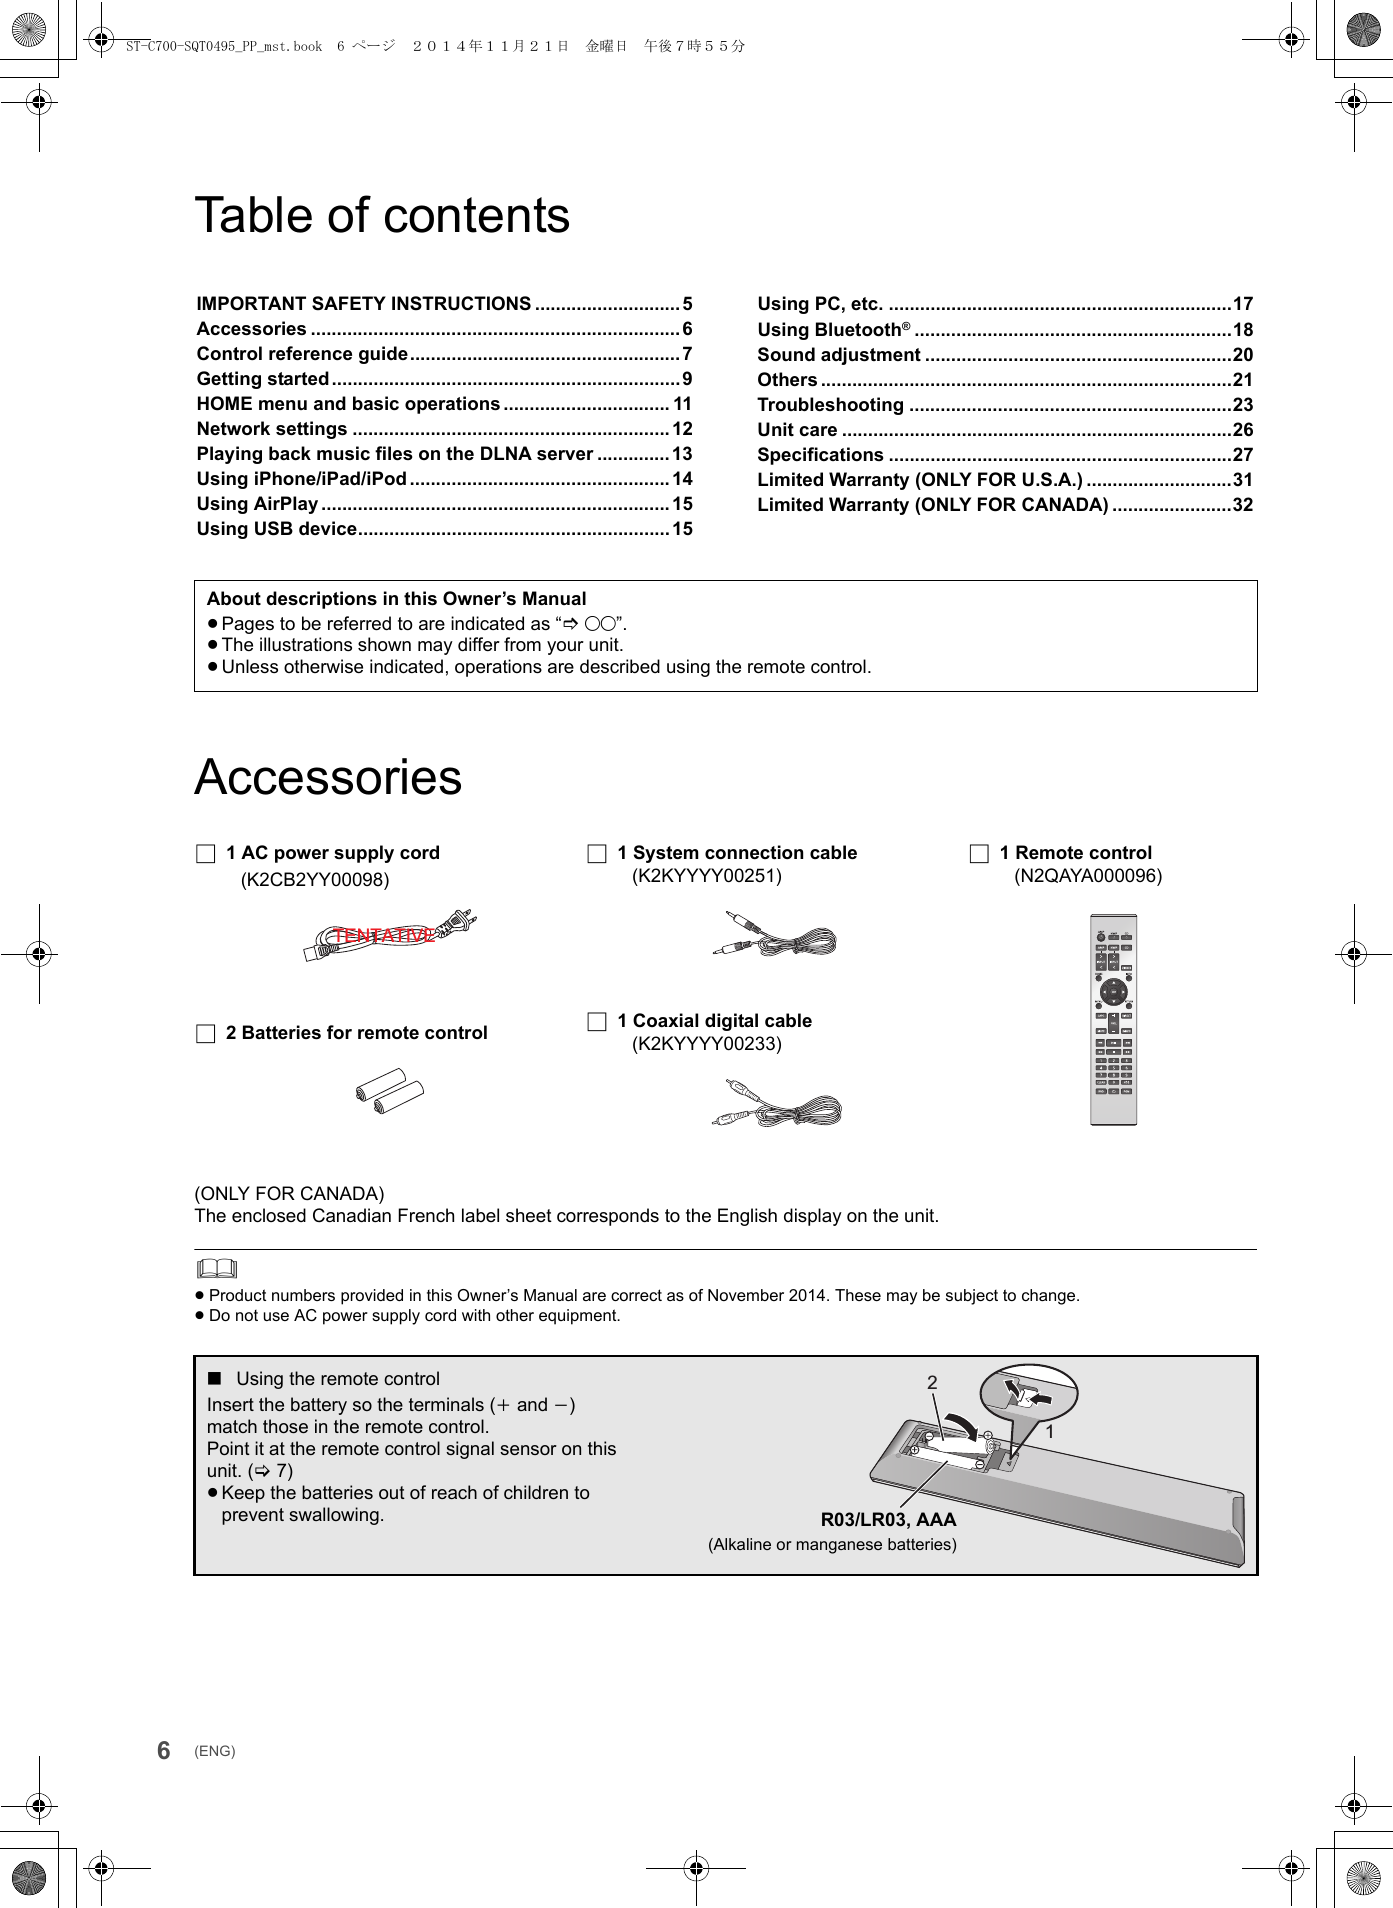 6(ENG)Table of contentsAccessories(ONLY FOR CANADA)The enclosed Canadian French label sheet corresponds to the English display on the unit.≥Product numbers provided in this Owner’s Manual are correct as of November 2014. These may be subject to change.≥Do not use AC power supply cord with other equipment.IMPORTANT SAFETY INSTRUCTIONS ............................5Accessories .......................................................................6Control reference guide....................................................7Getting started...................................................................9HOME menu and basic operations ................................ 11Network settings .............................................................12Playing back music files on the DLNA server ..............13Using iPhone/iPad/iPod ..................................................14Using AirPlay ...................................................................15Using USB device............................................................15Using PC, etc. ..................................................................17Using Bluetooth®.............................................................18Sound adjustment ...........................................................20Others ...............................................................................21Troubleshooting ..............................................................23Unit care ...........................................................................26Specifications ..................................................................27Limited Warranty (ONLY FOR U.S.A.) ............................31Limited Warranty (ONLY FOR CANADA) .......................32About descriptions in this Owner’s Manual≥Pages to be referred to are indicated as “@±±”.≥The illustrations shown may differ from your unit.≥Unless otherwise indicated, operations are described using the remote control.∏1 AC power supply cord(K2CB2YY00098)∏2 Batteries for remote control∏1 System connection cable(K2KYYYY00251)∏1 Coaxial digital cable(K2KYYYY00233)∏1 Remote control(N2QAYA000096)∫Using the remote controlInsert the battery so the terminals (i and j) match those in the remote control.Point it at the remote control signal sensor on this unit. (&gt;7)≥Keep the batteries out of reach of children to prevent swallowing.TENTATIVE21R03/LR03, AAA(Alkaline or manganese batteries)ST-C700-SQT0495_PP_mst.book  6 ページ  ２０１４年１１月２１日　金曜日　午後７時５５分